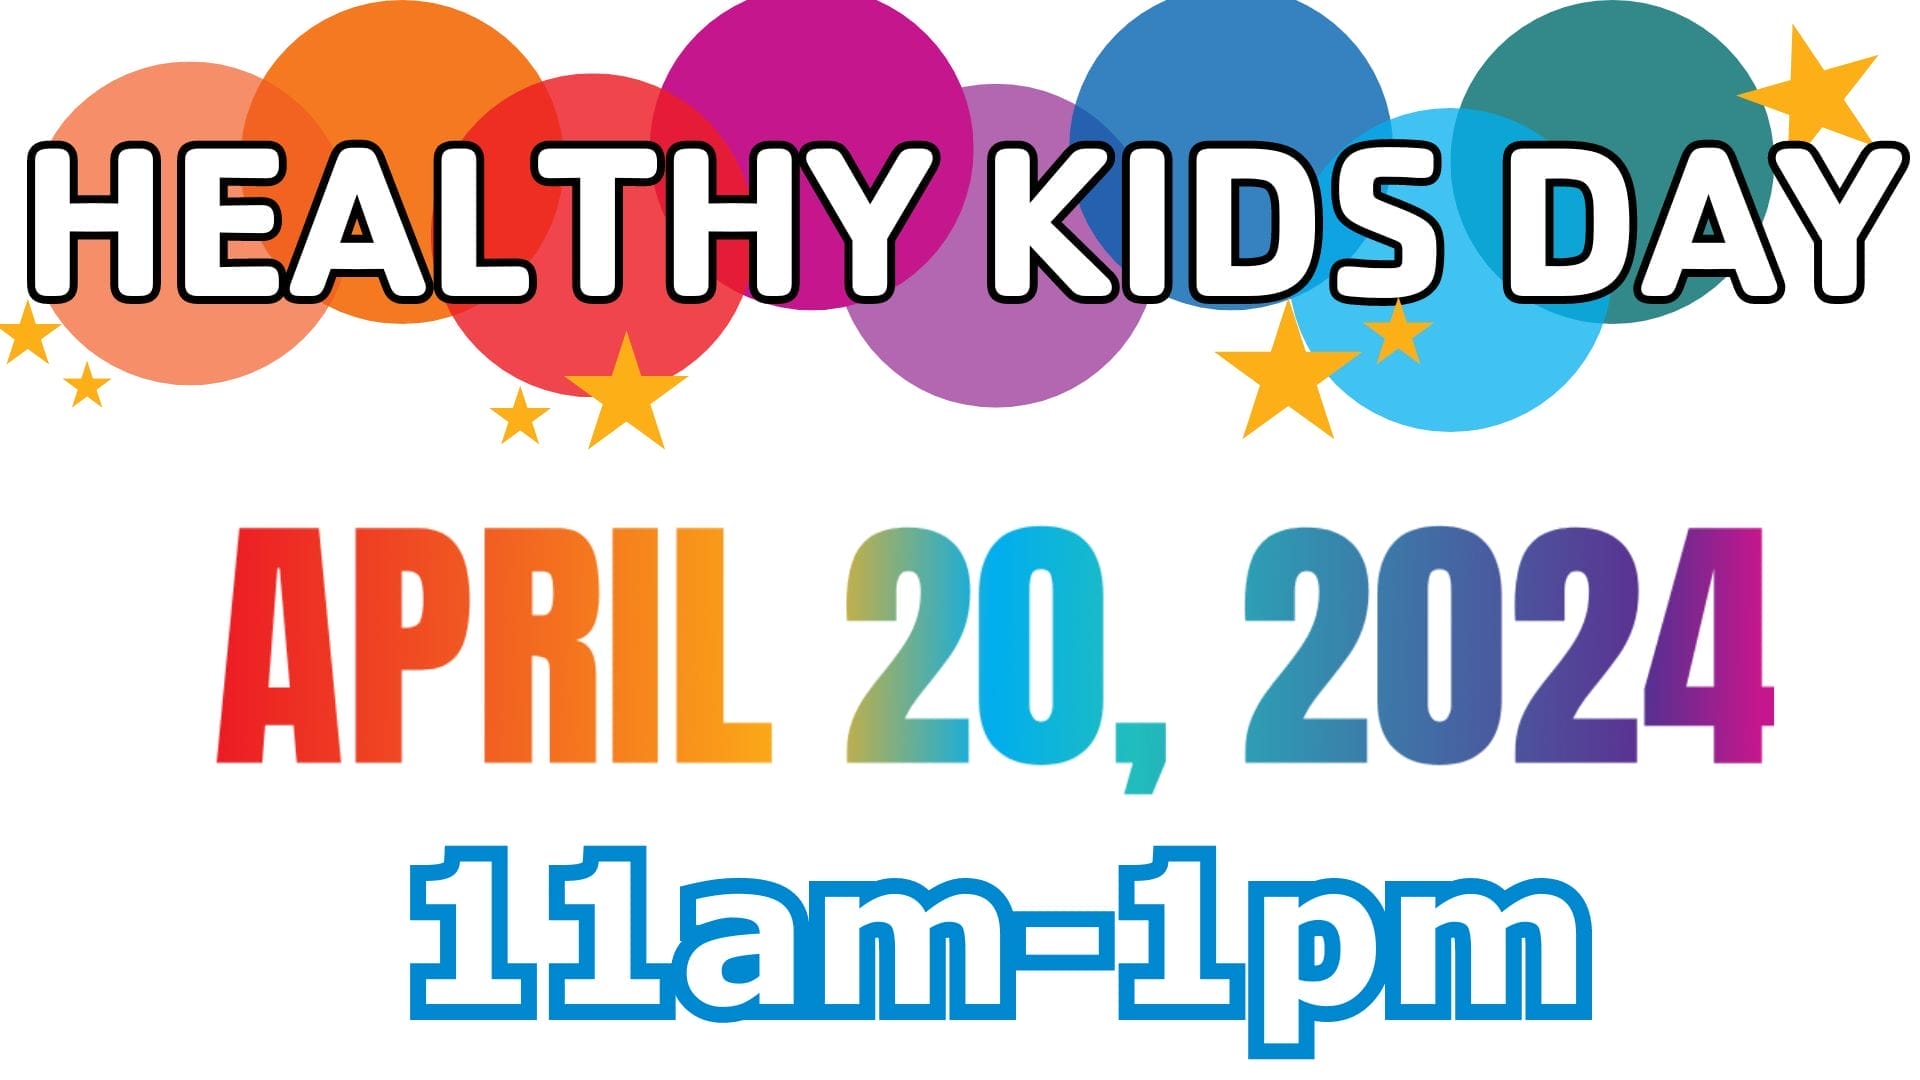 HEALTHY KIDS DAY